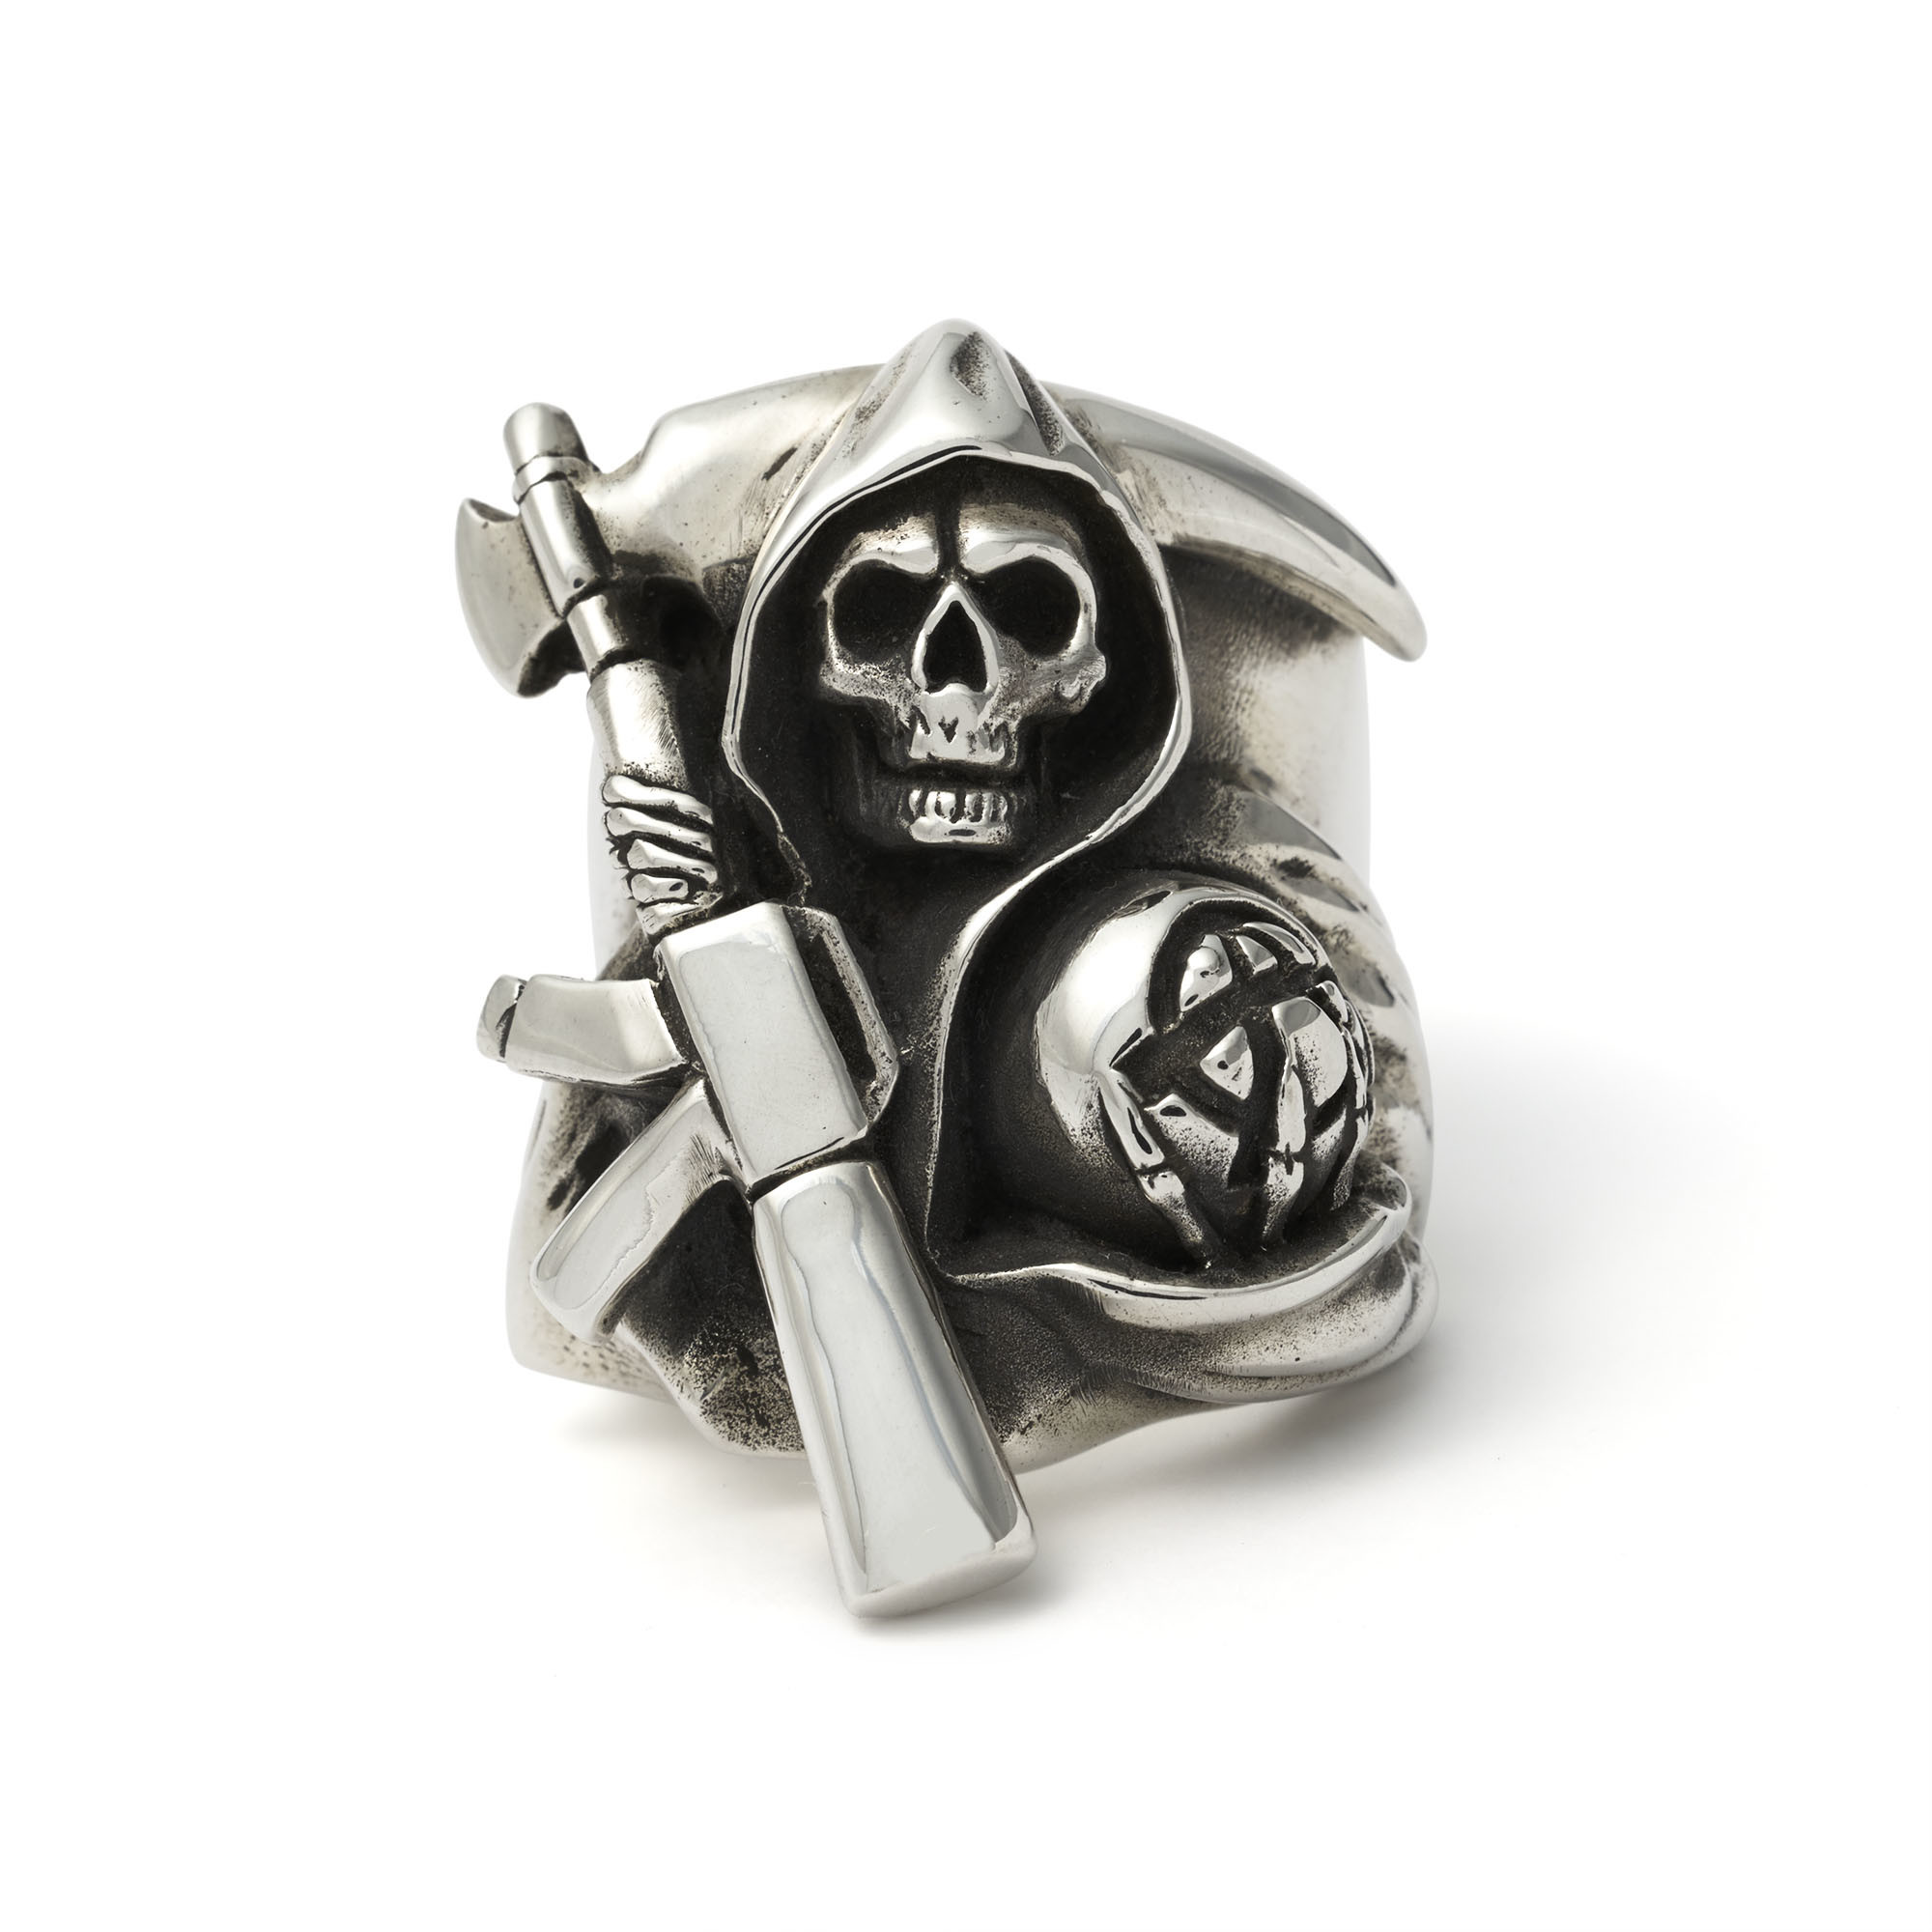 2000x2000 Official Sons of Anarchy 'Reaper' ring by The Great Frog. Please email info